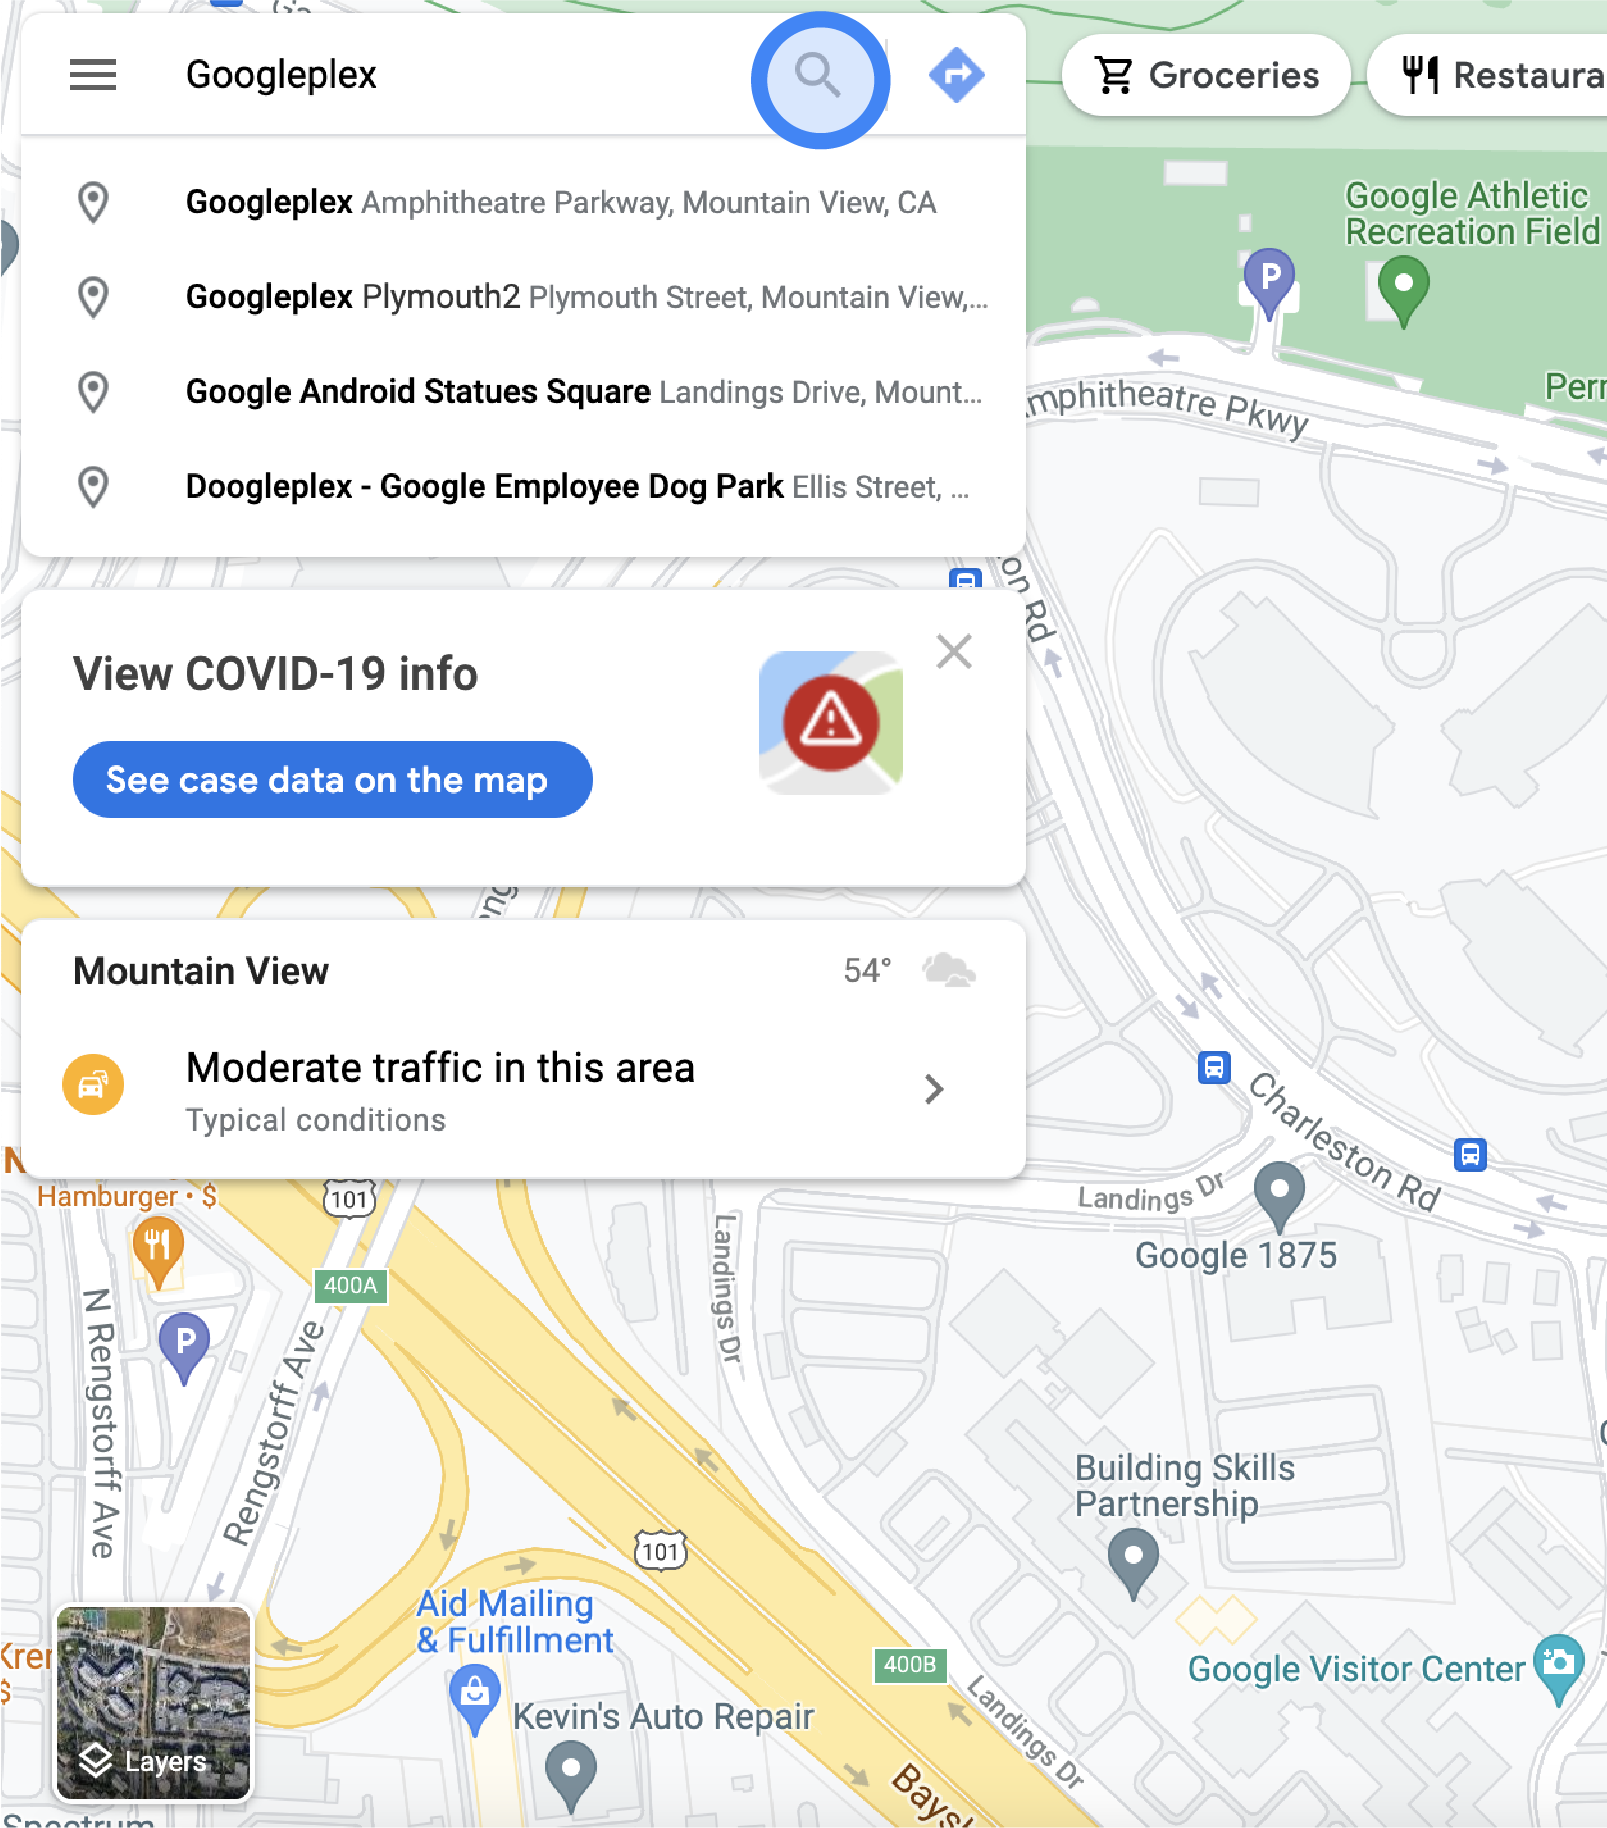 Add, edit, or delete Google Maps reviews & ratings - Computer - Google Maps  Help